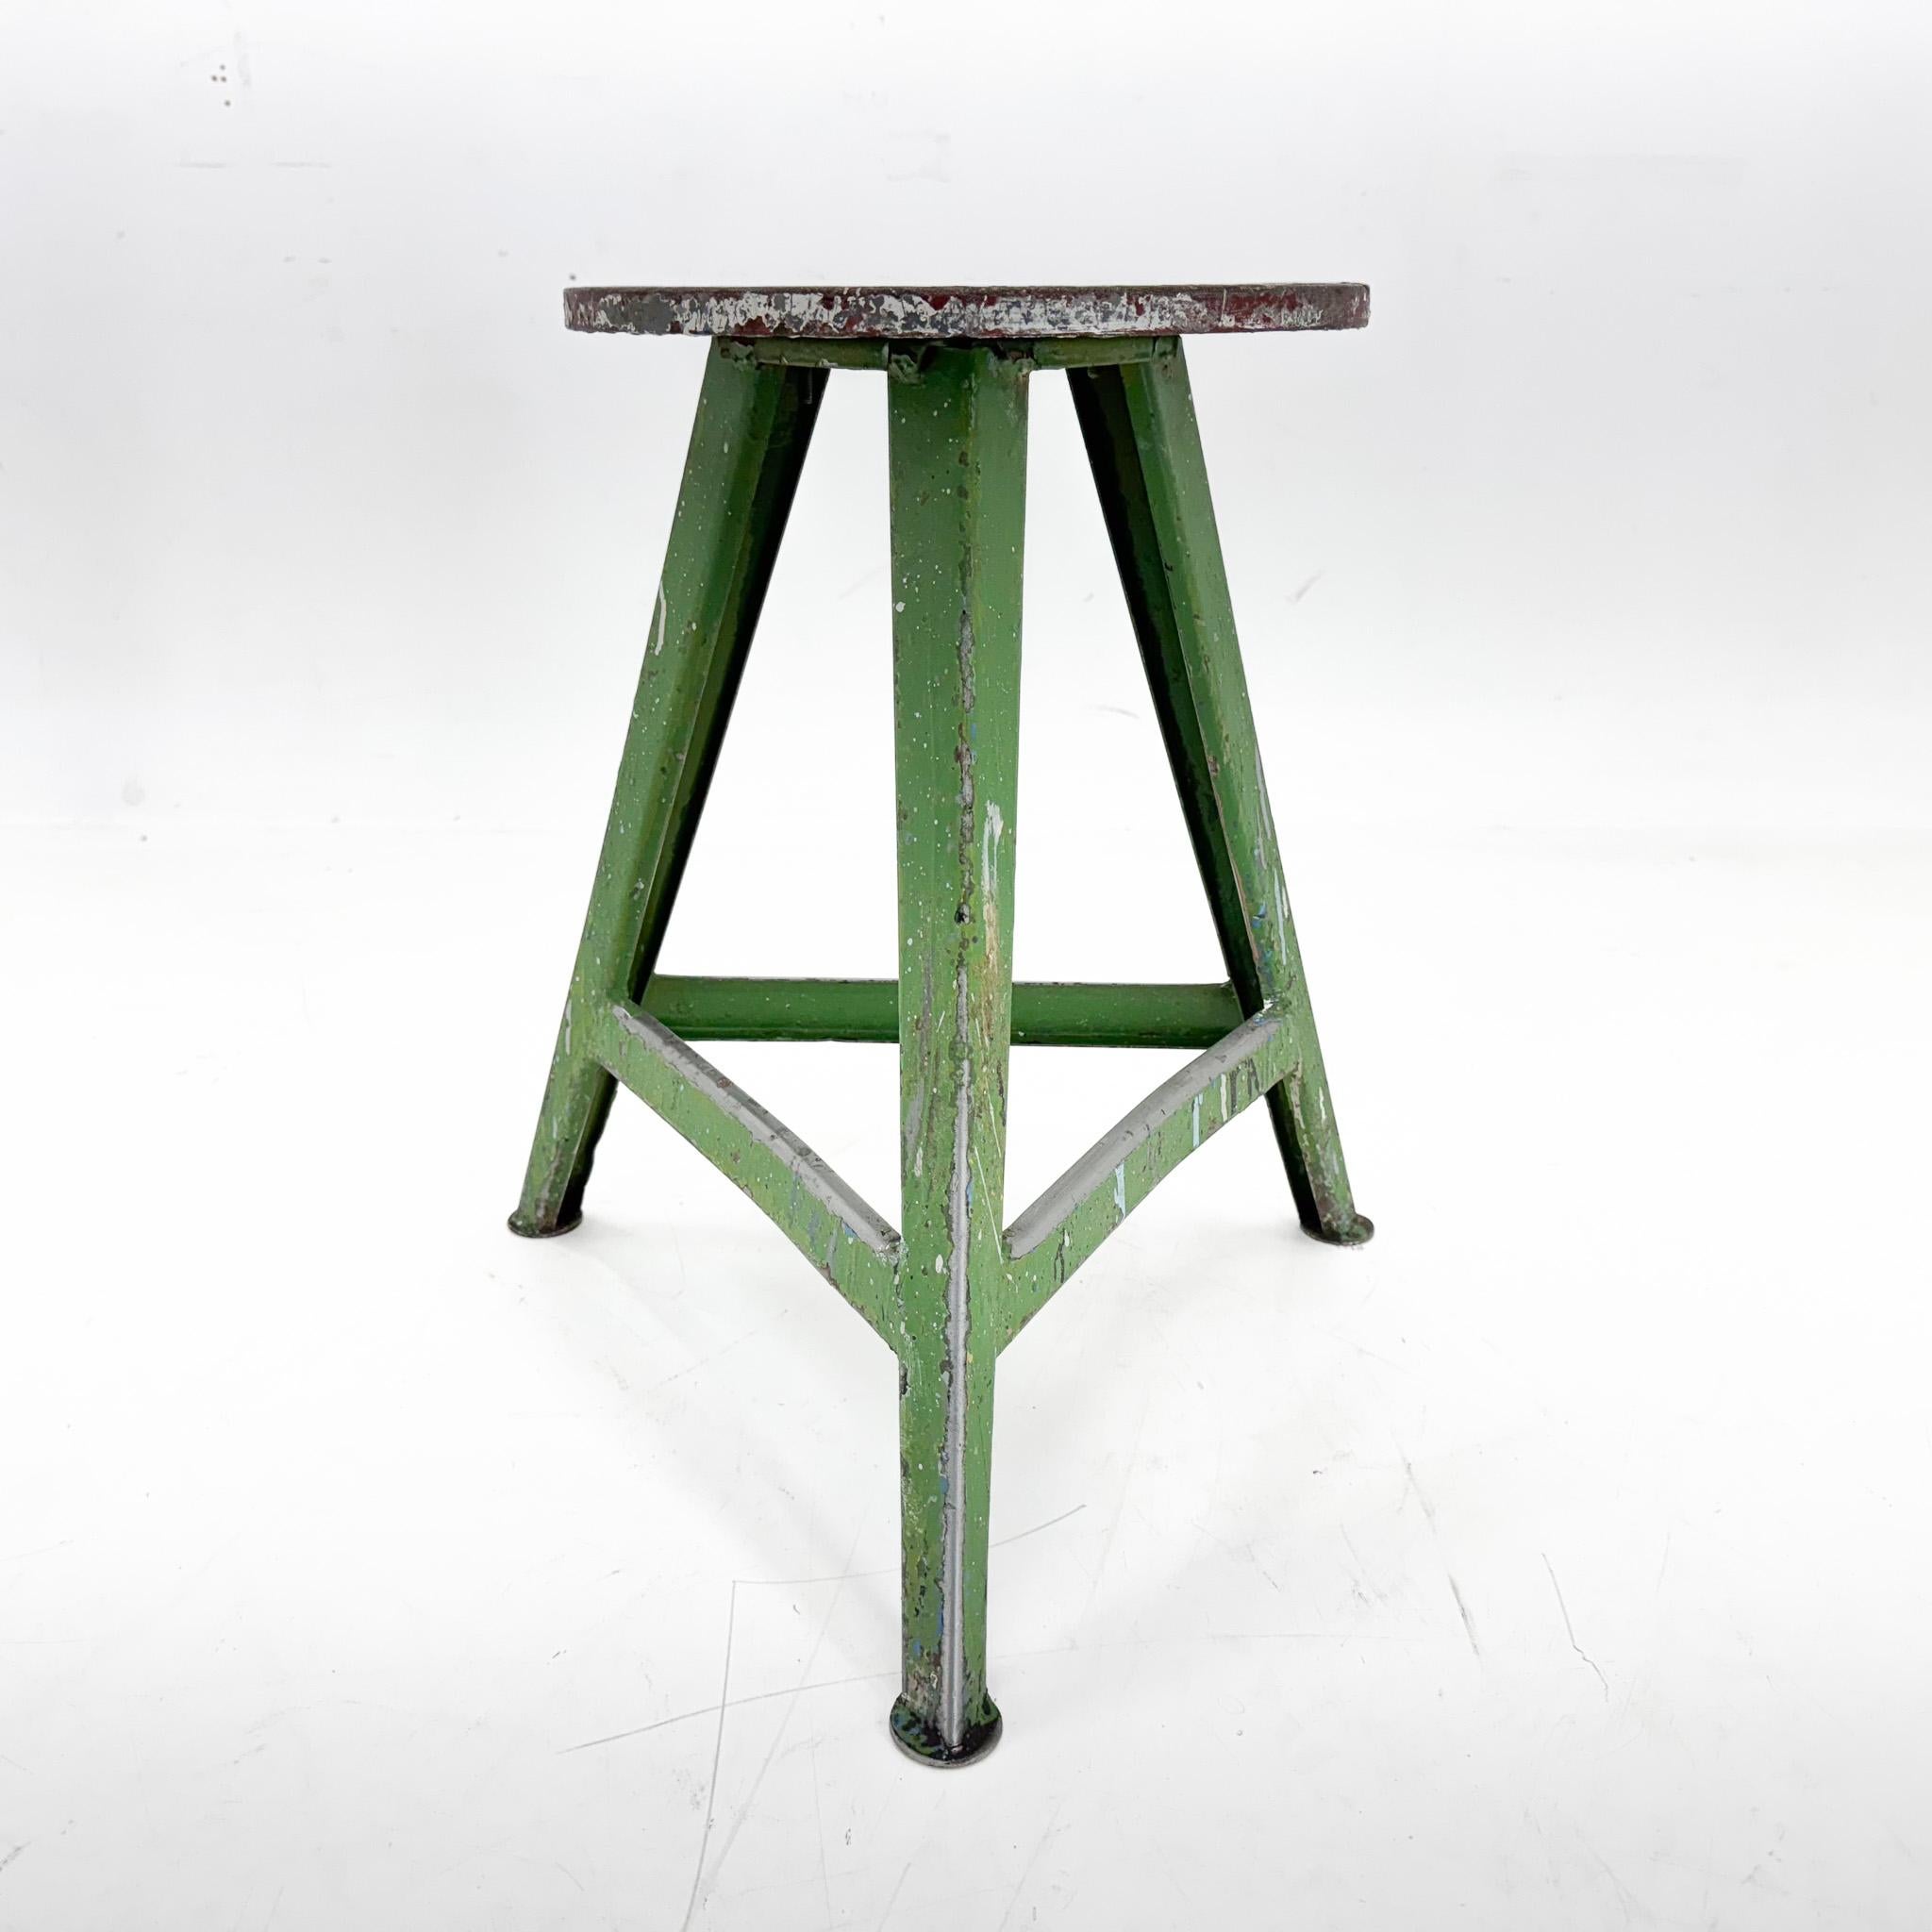 Czech Vintage Industrial Steel & Wood Tripod Stool with Original Patina, 1950's For Sale